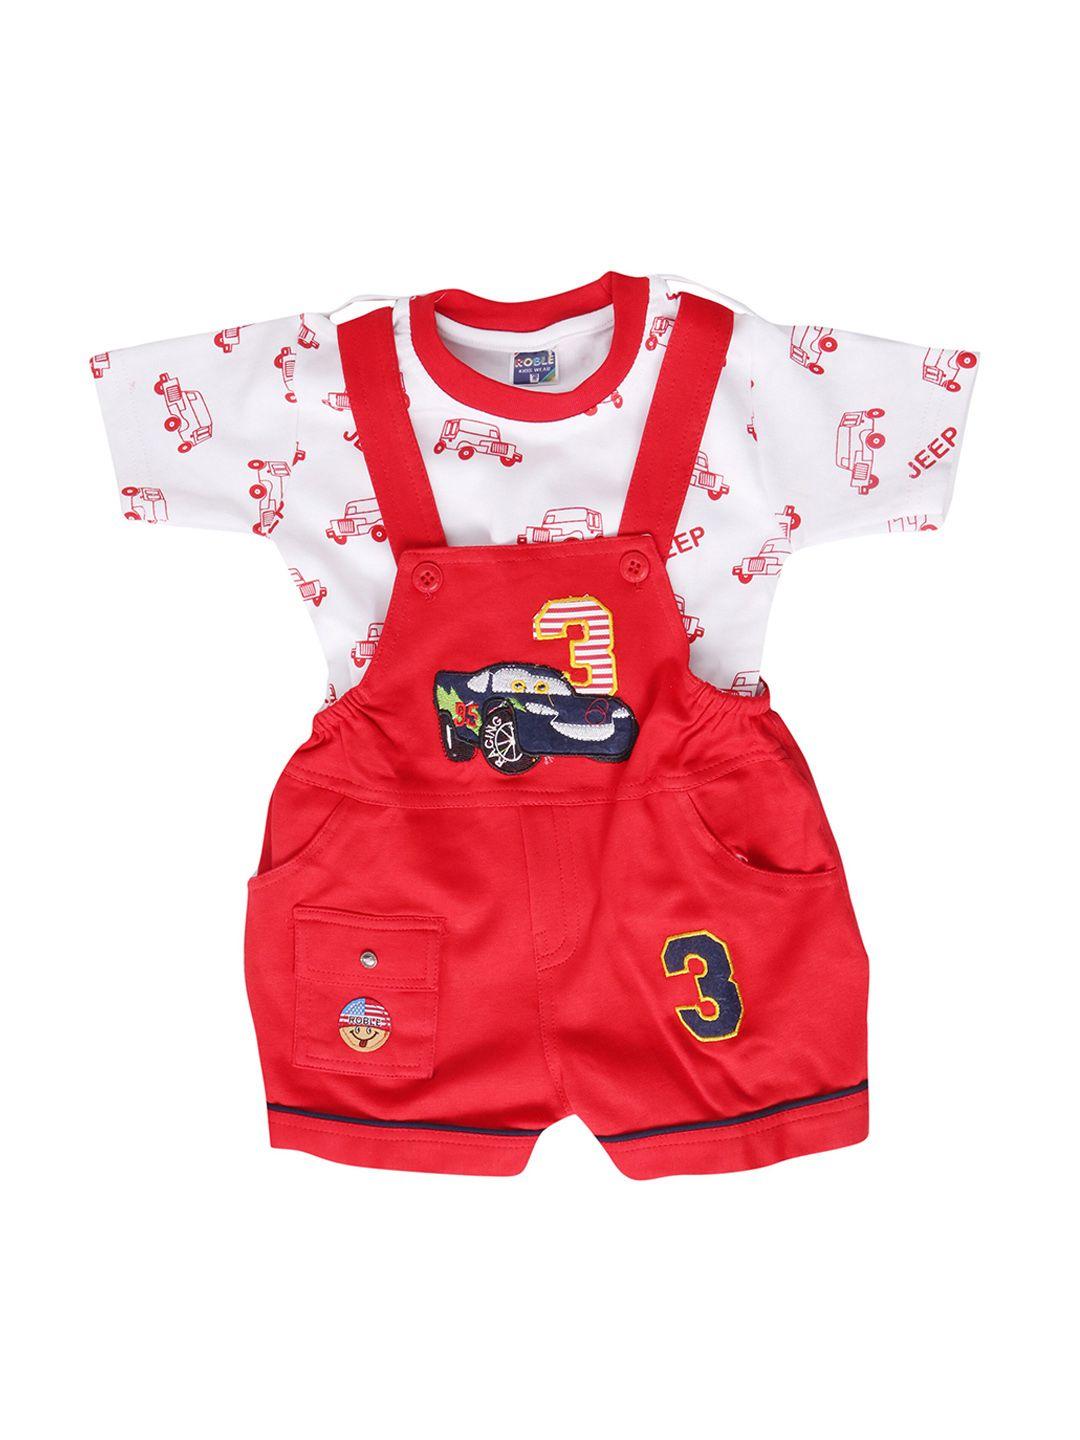 baesd infant applique patch graphic printed pure cotton dungaree